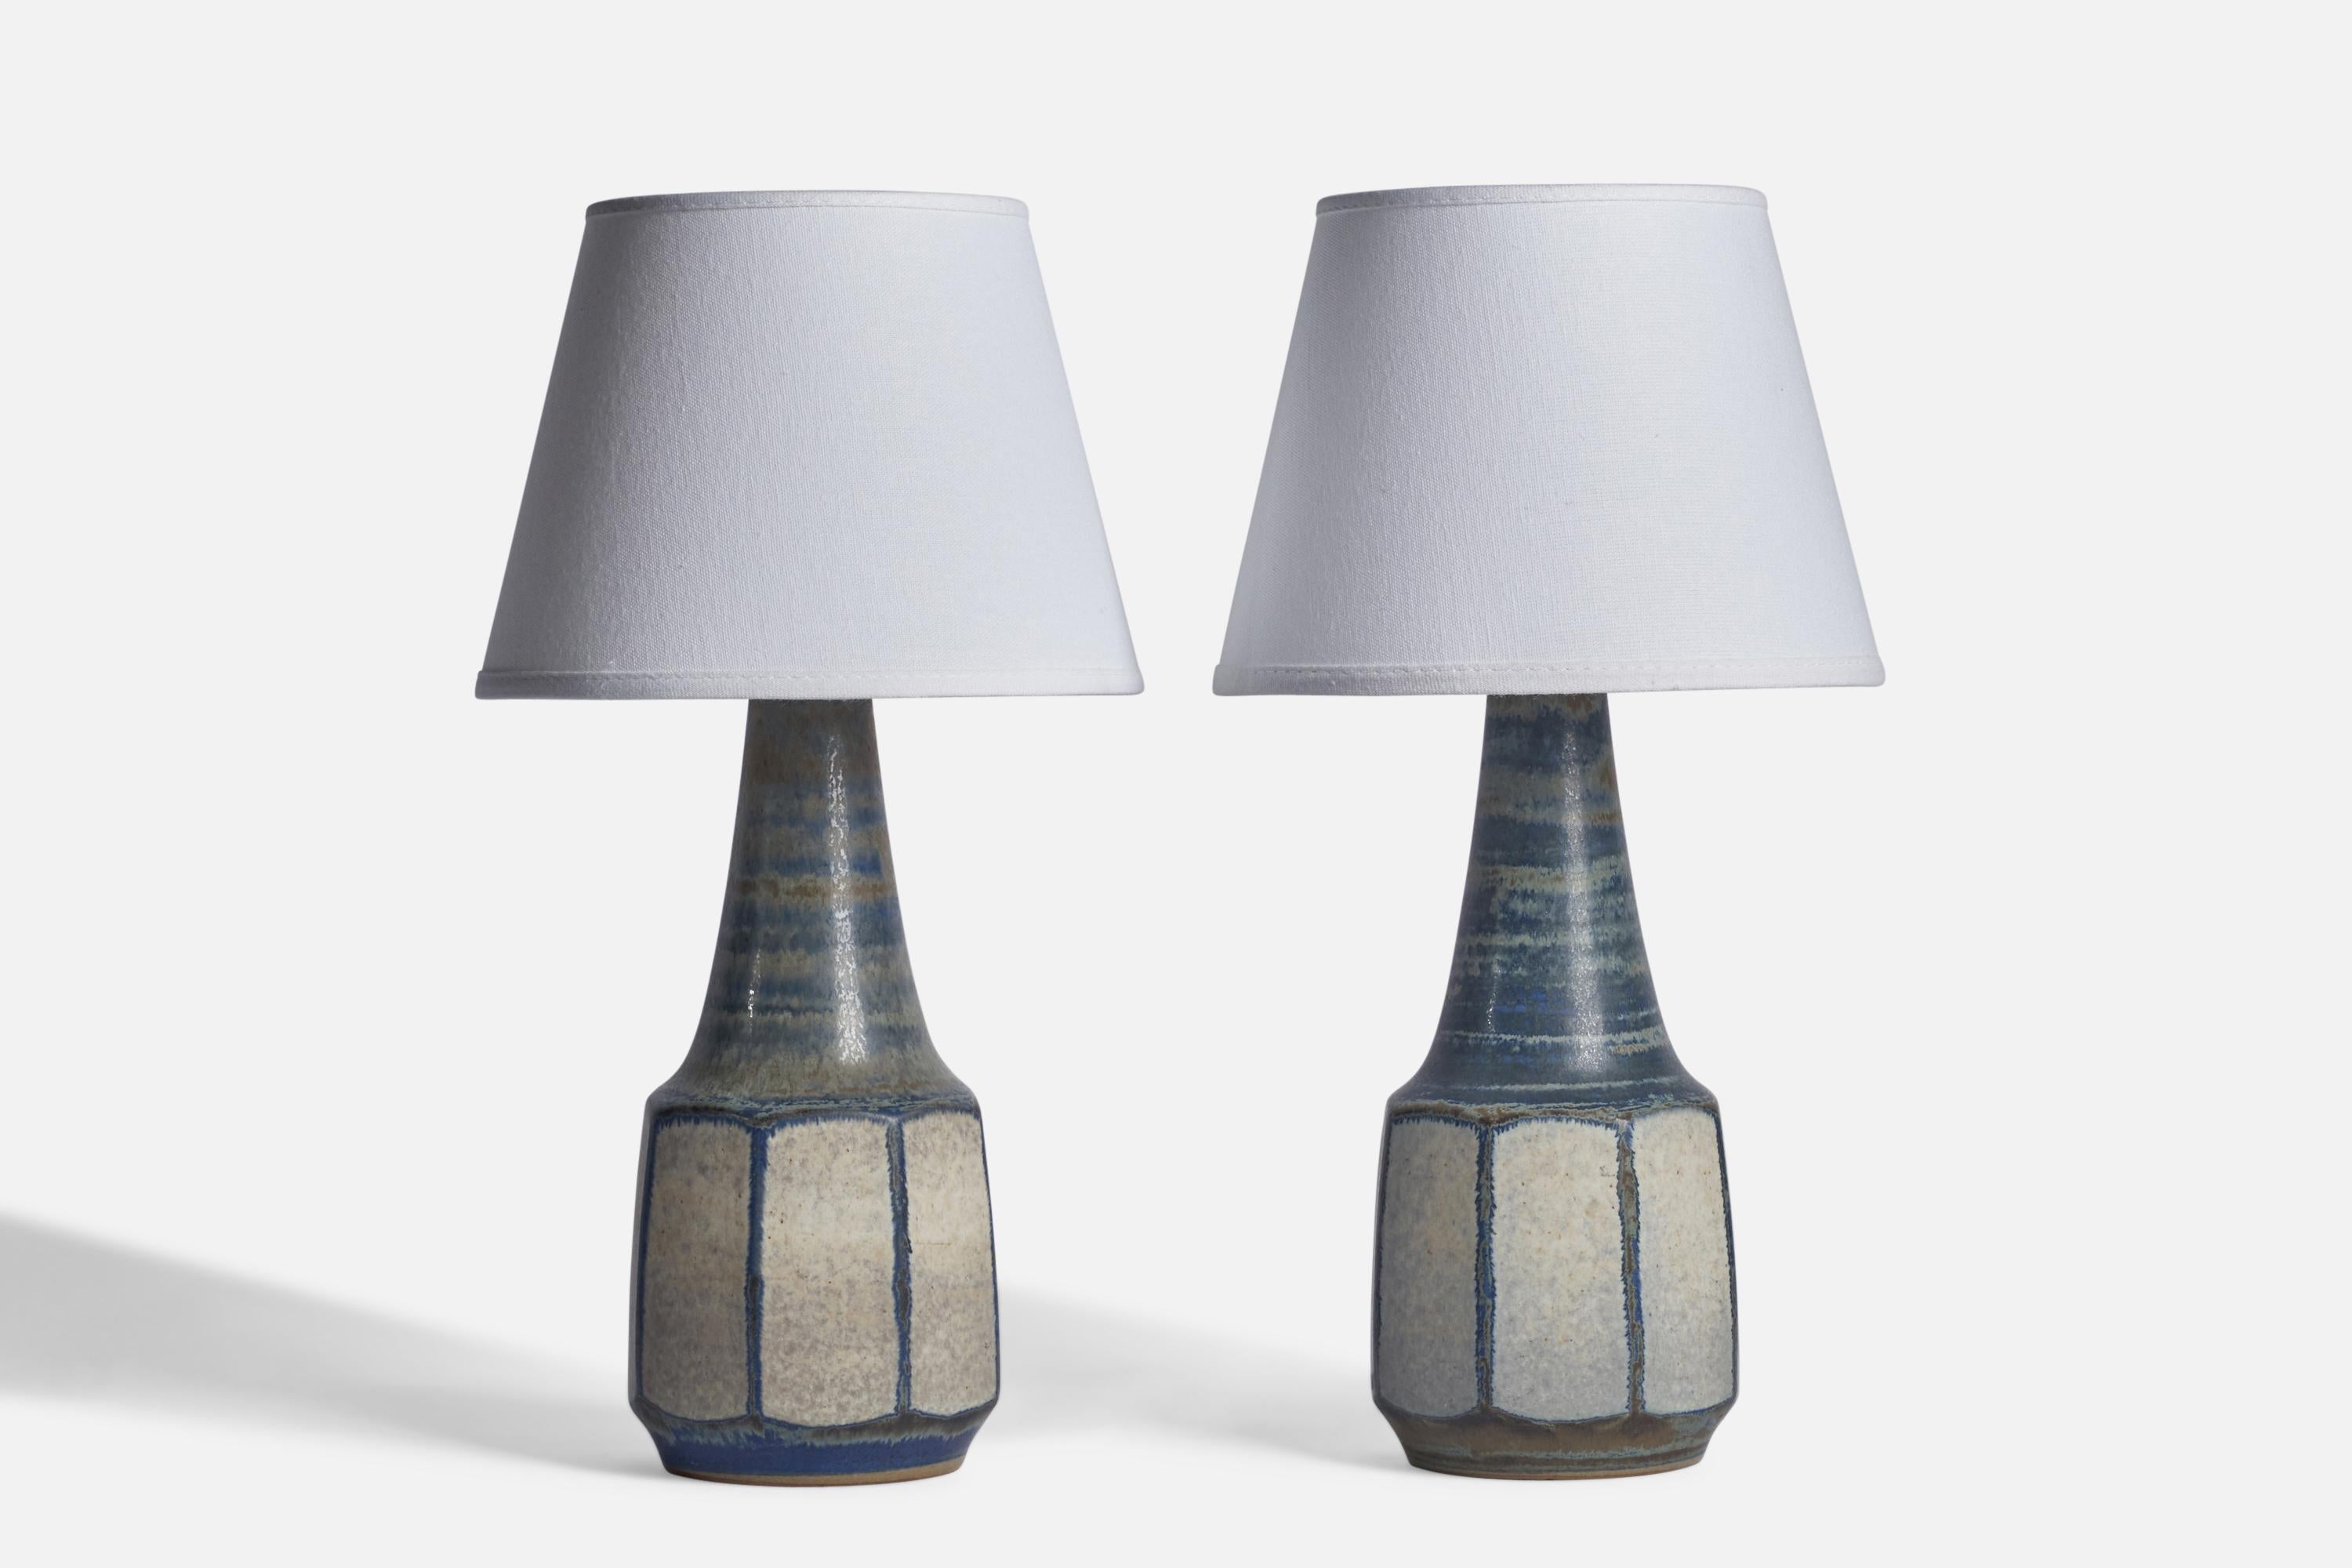 A pair of blue and grey-glazed stoneware table lamps designed by Marianne Starck and produced by Michael Andersen, Bornholm, Denmark, 1960s.
Dimensions of Lamp (inches): 12.5